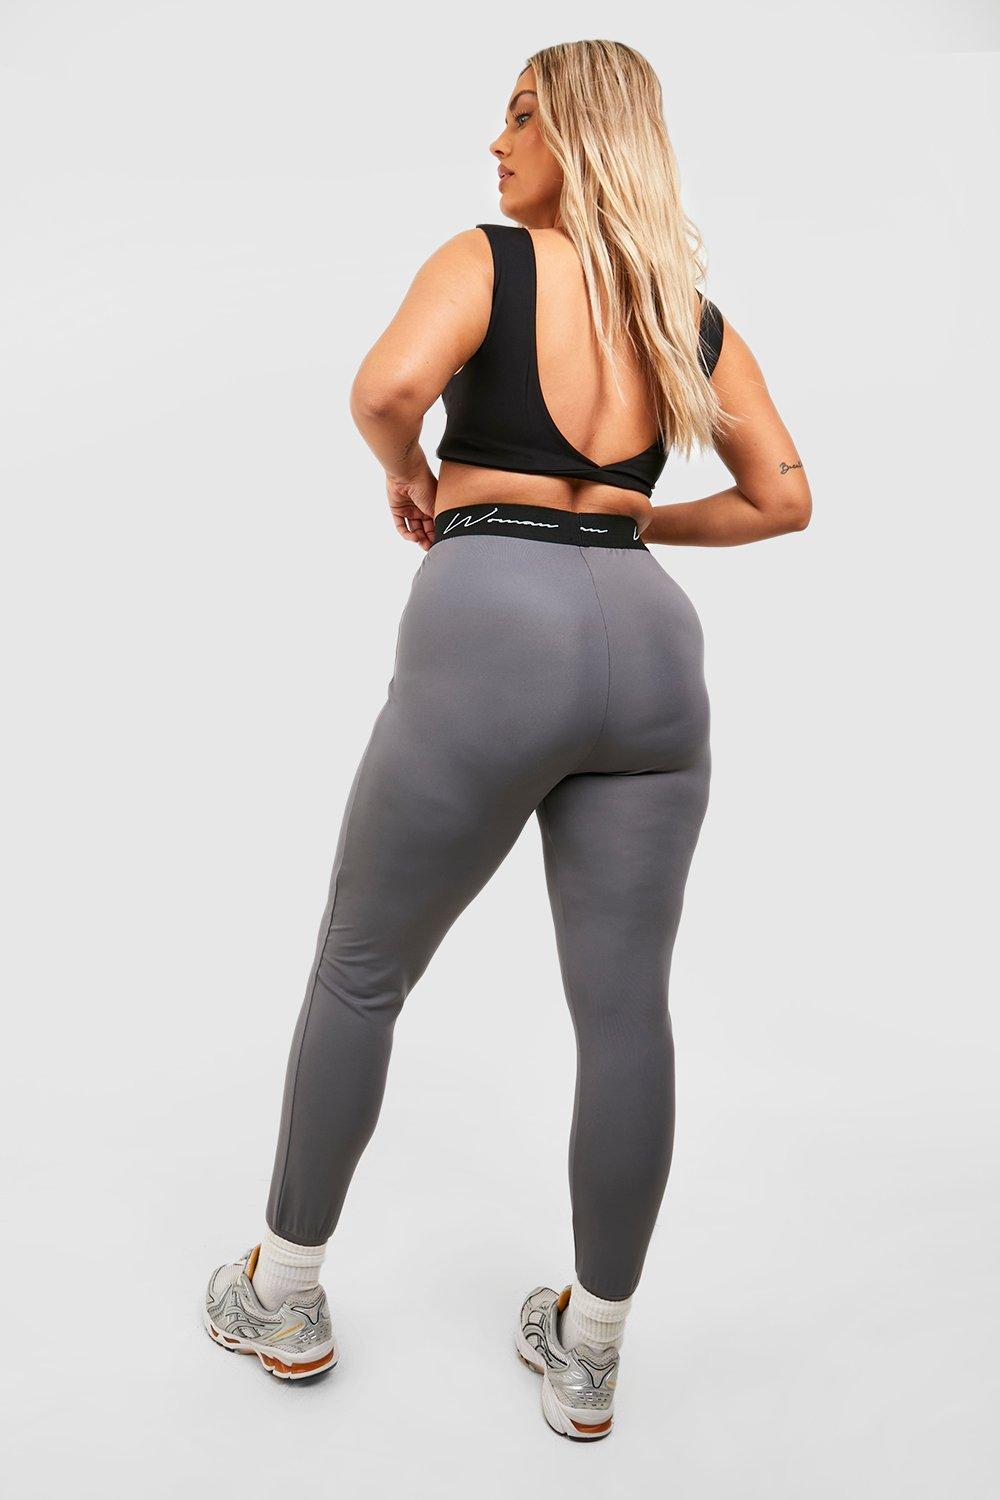 Plus Activewear 'Woman' Compression Workout Leggings | boohoo